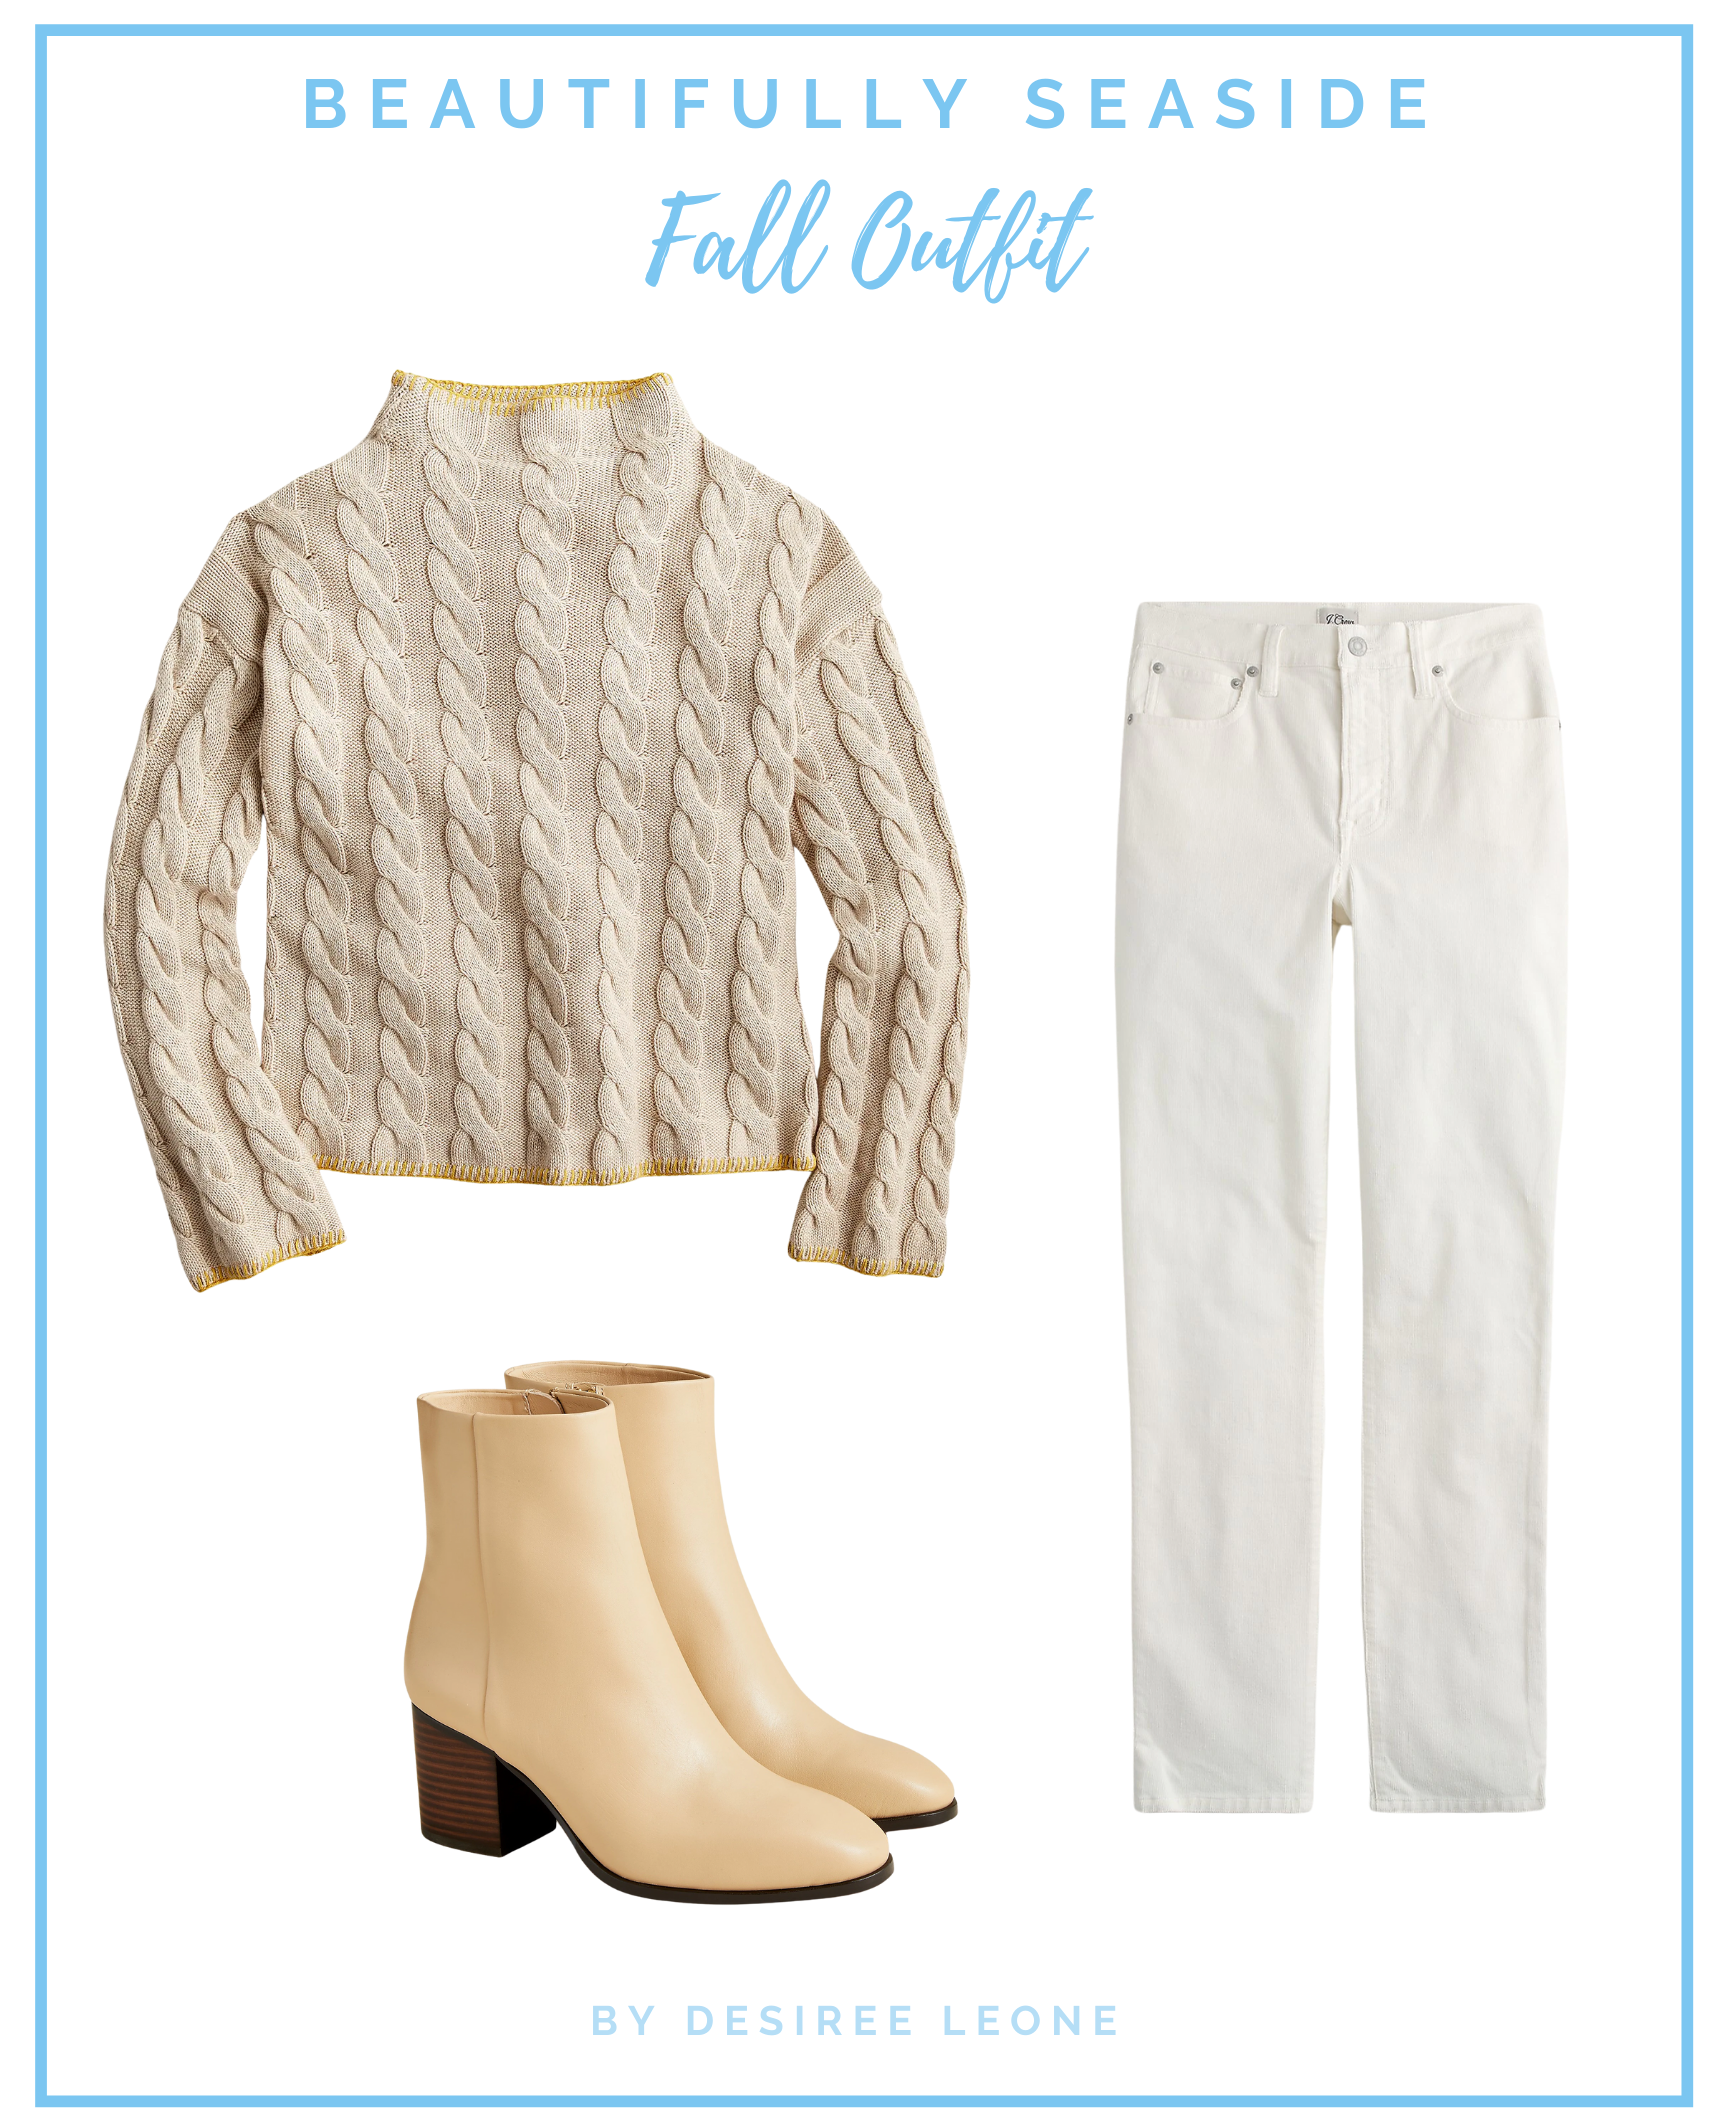 Fall Outfit Ideas That Aren't Basic - The Pretty Planeteer